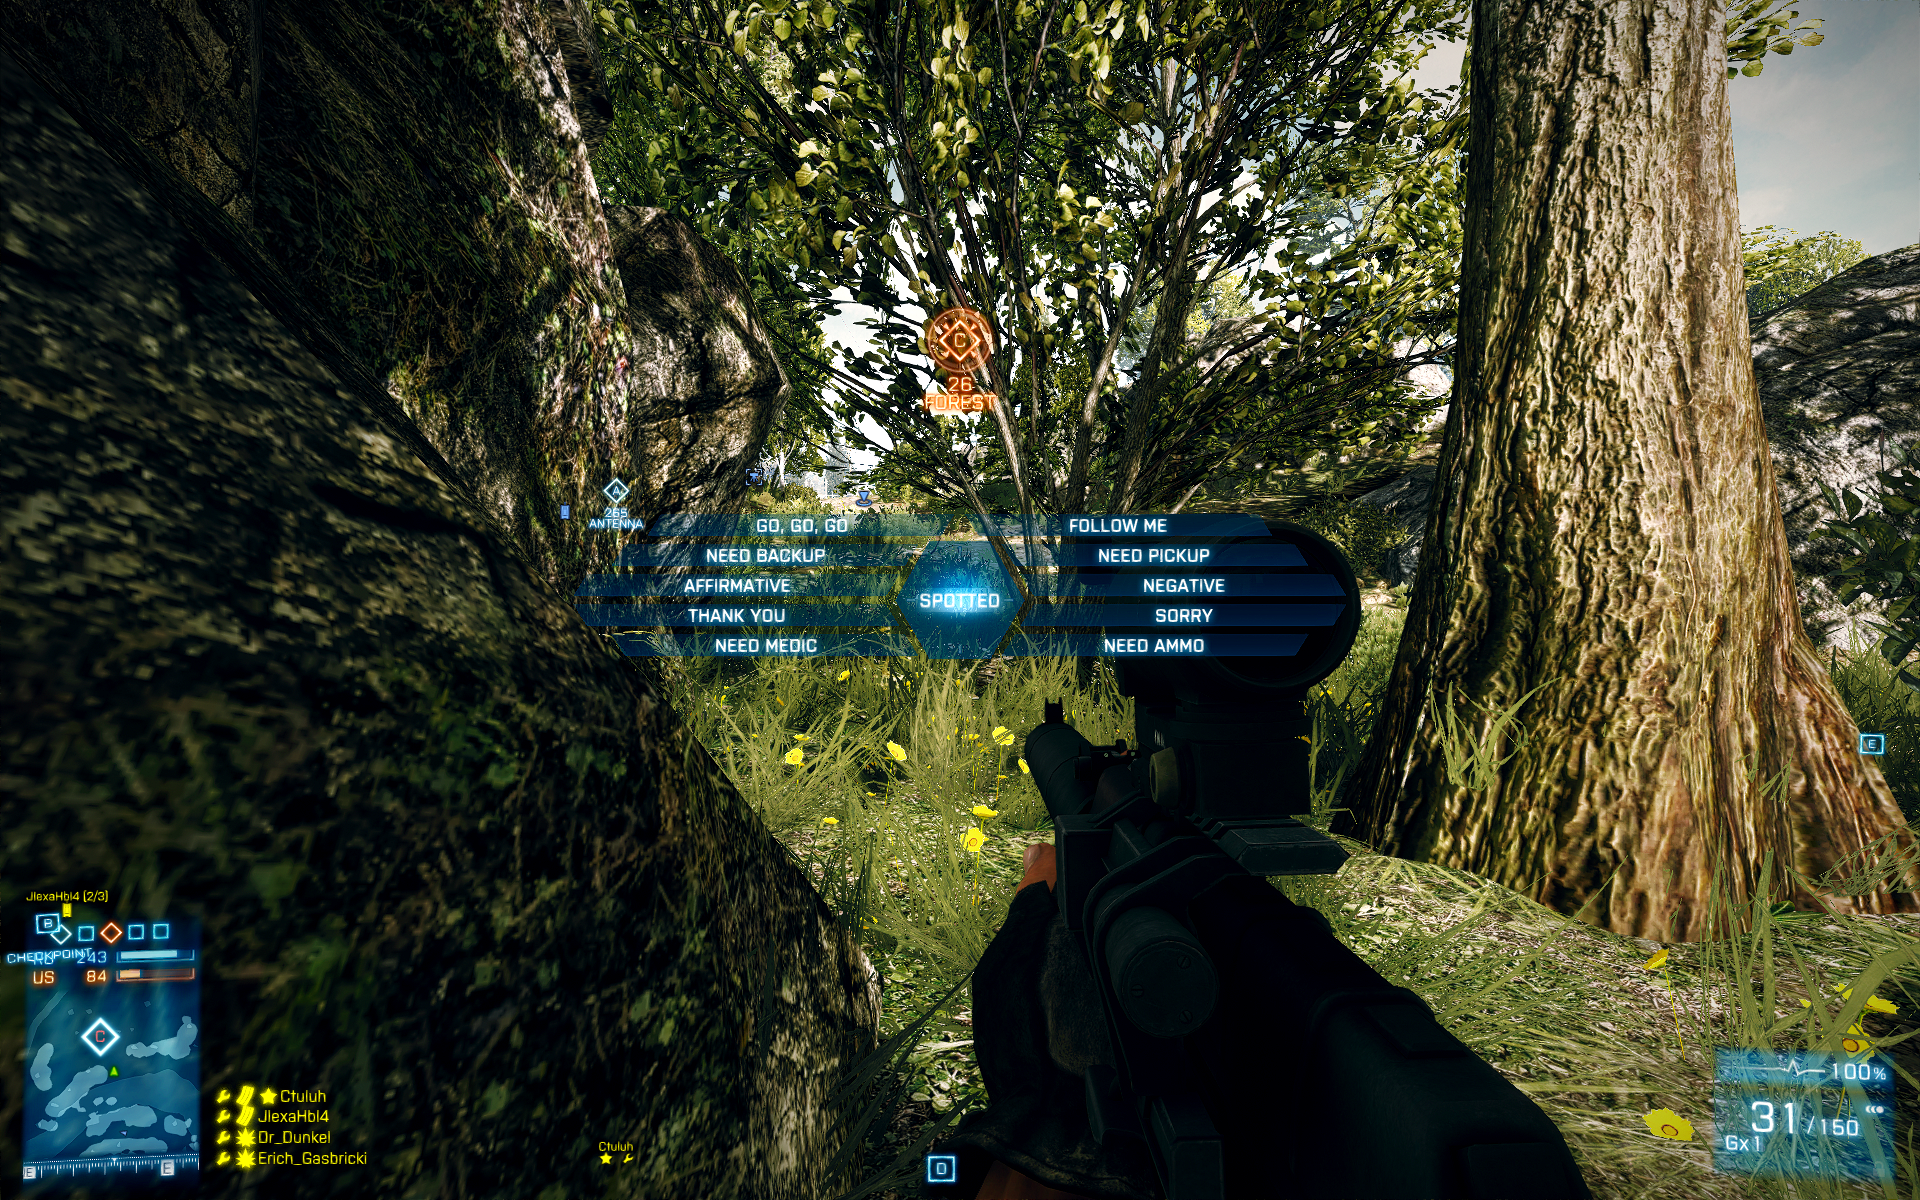 bf32012-03-2912-27-51opzvp.png